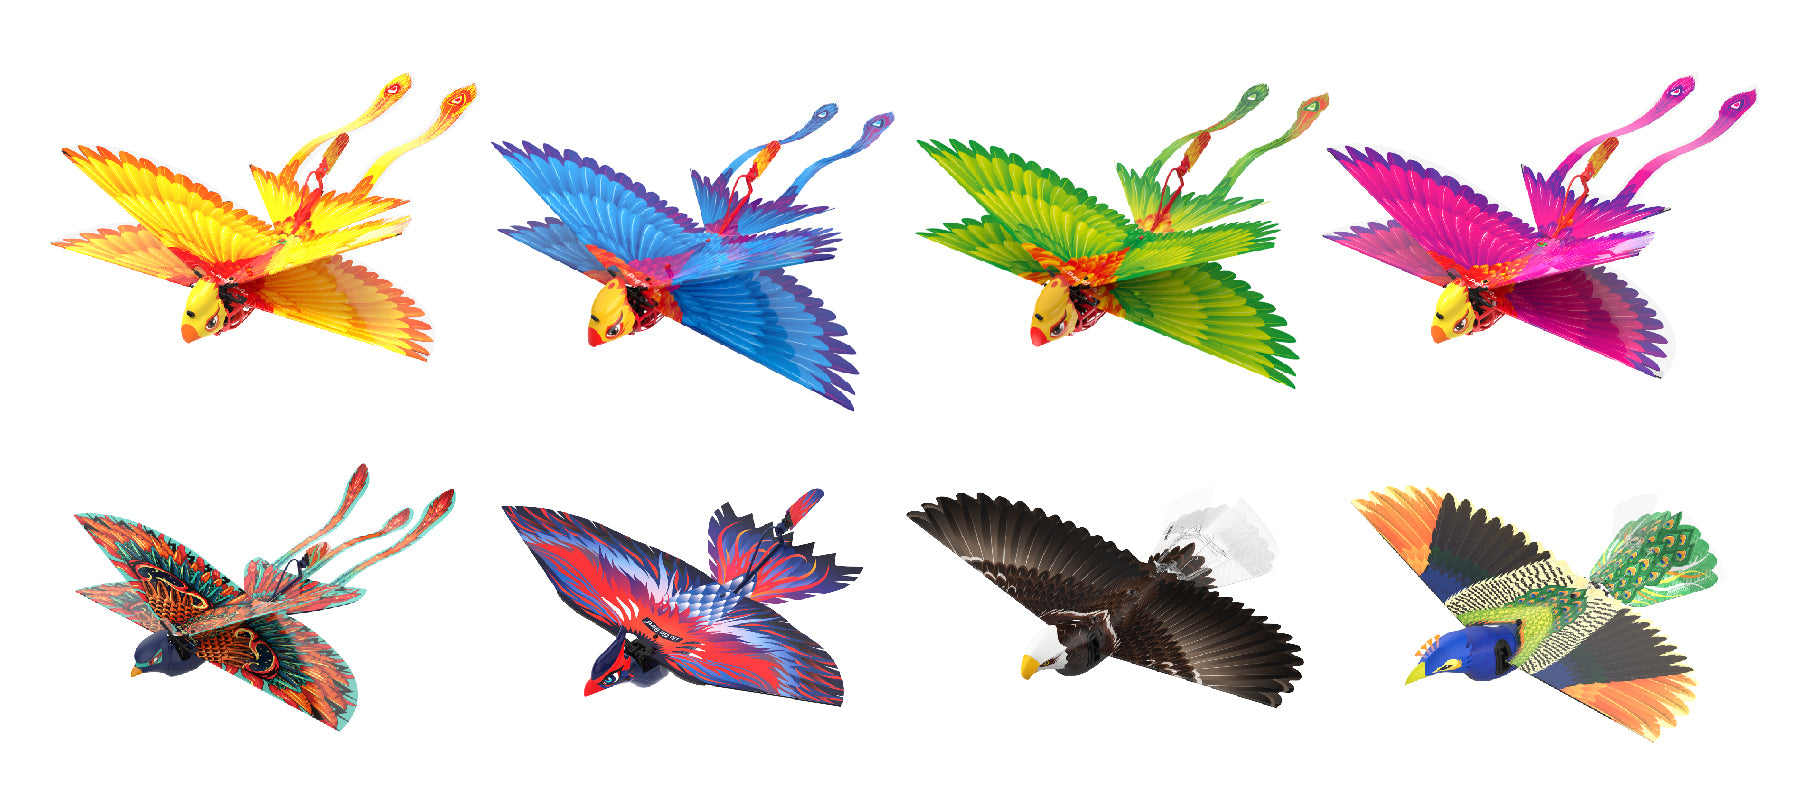 Go Go Bird Ornithopters Reviews from Rcfuntime